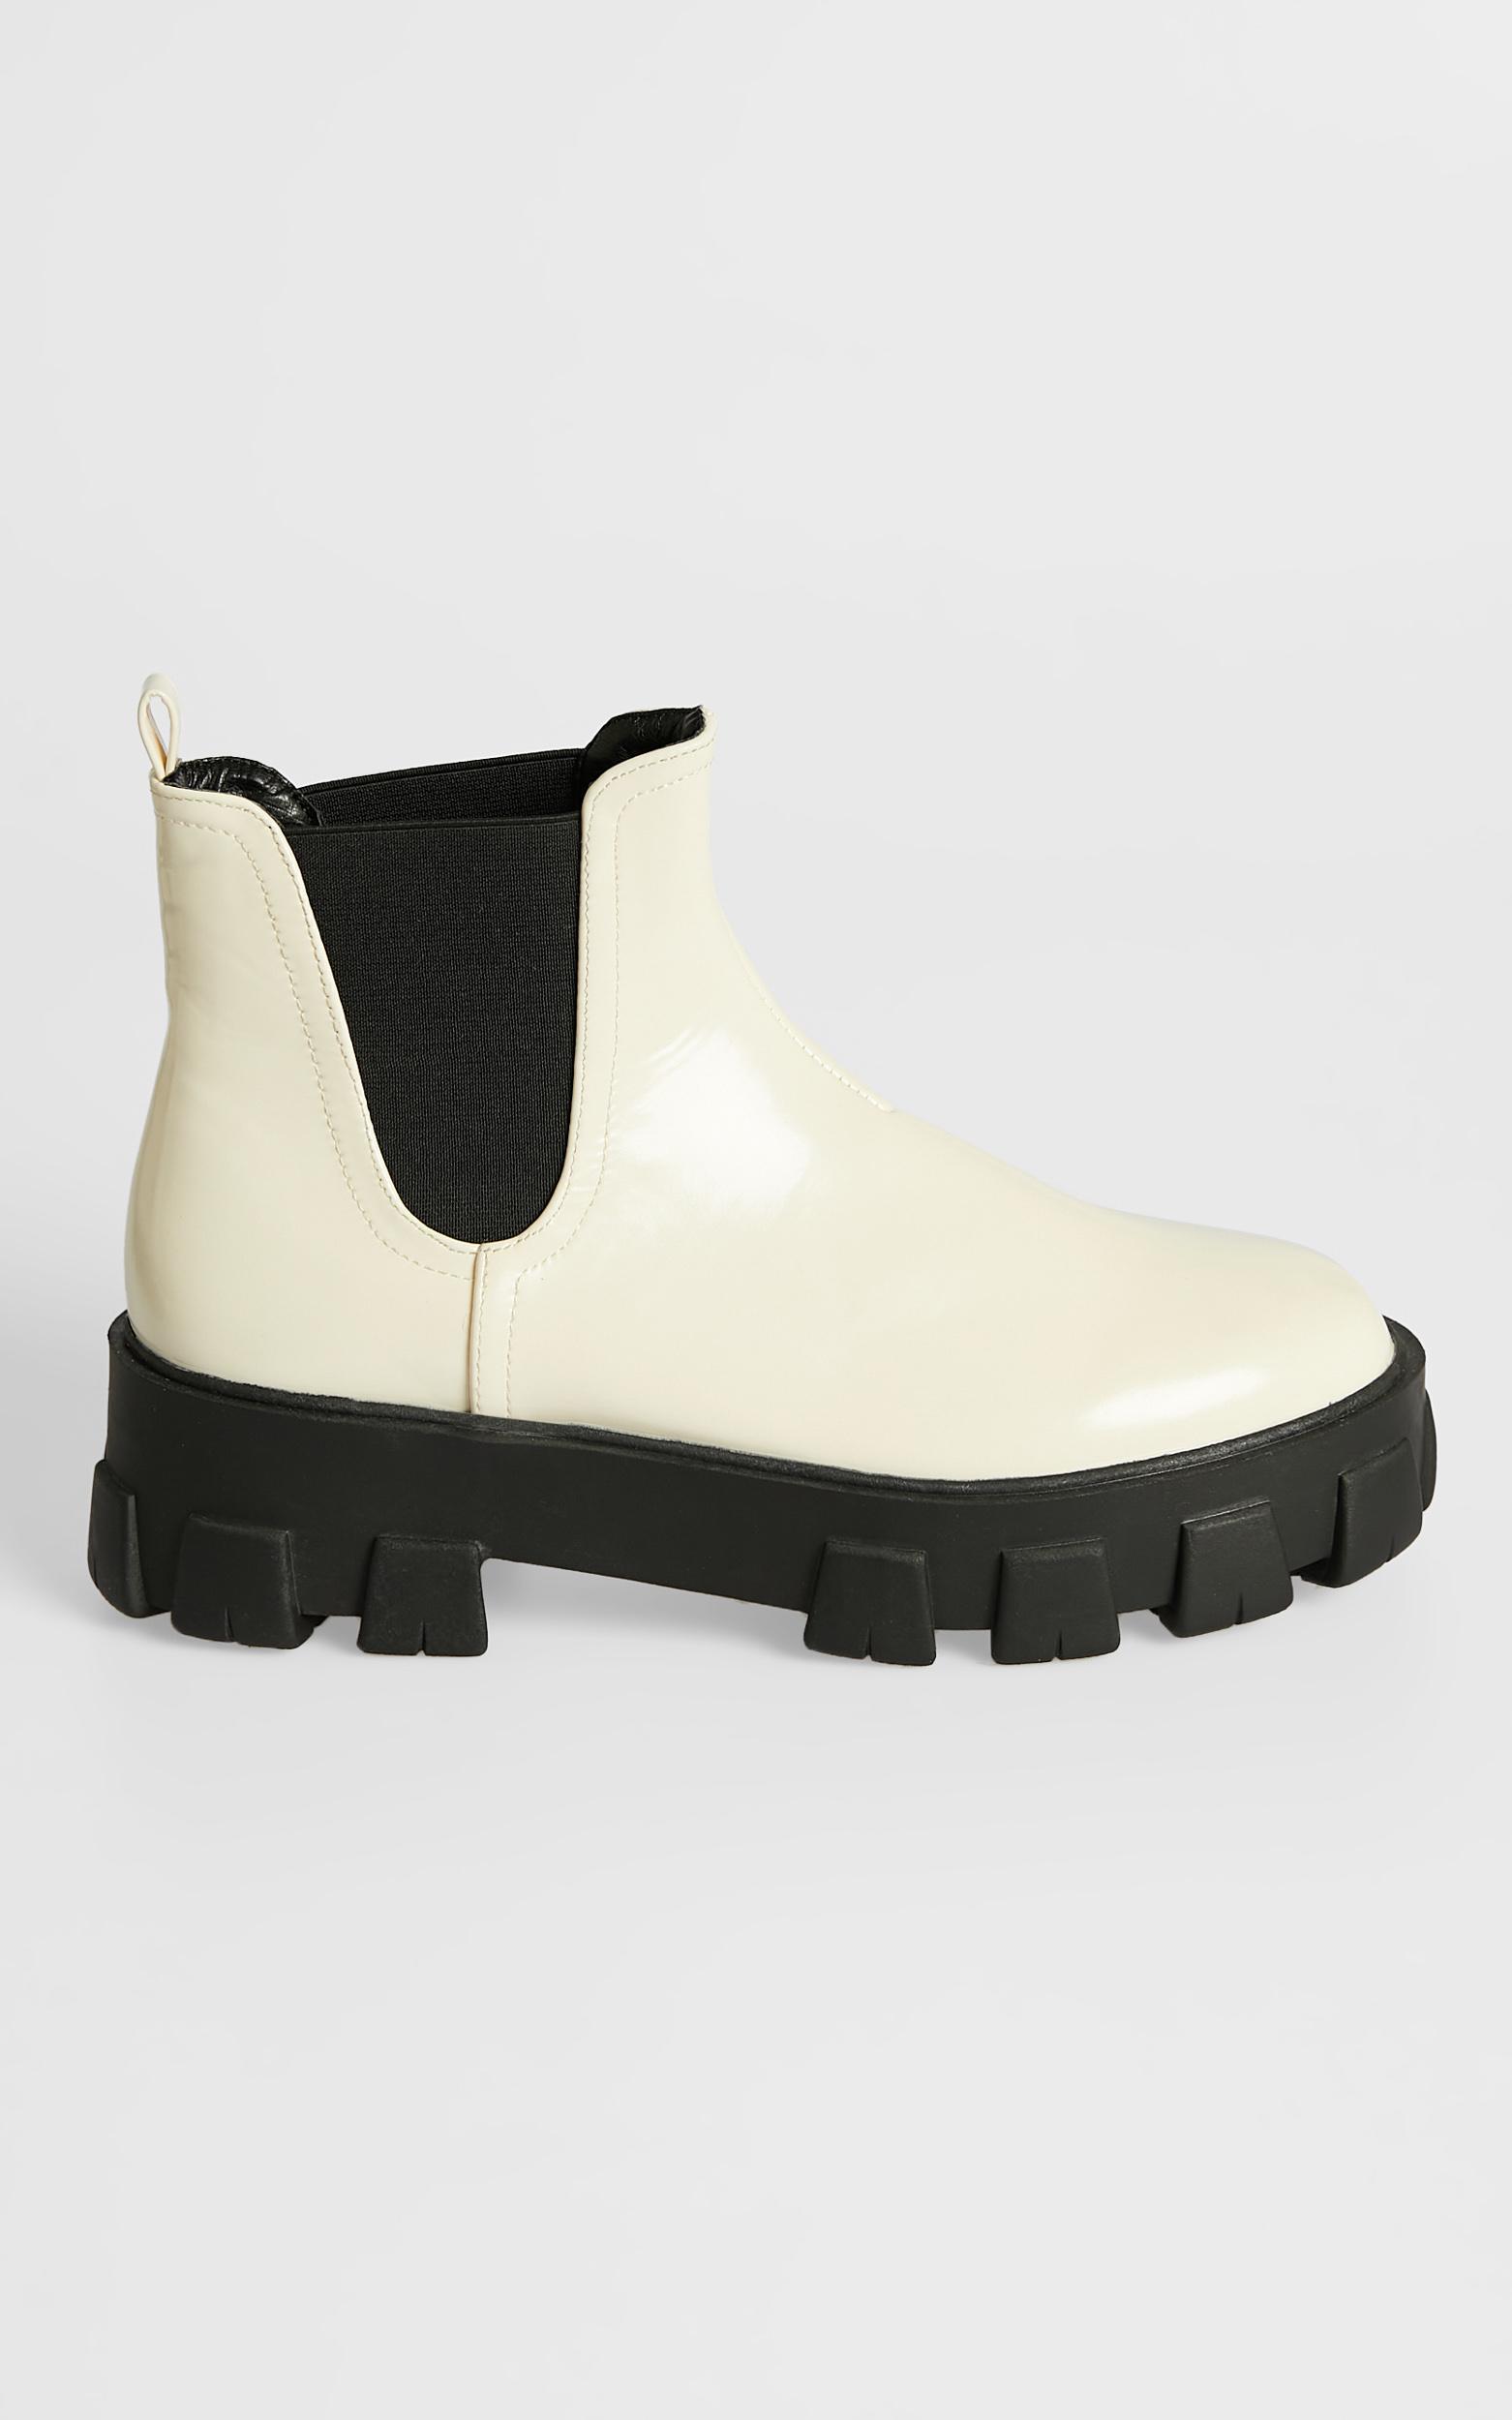 Billini - Xanthos Boots in Bone Patent - 05, BRN2, hi-res image number null